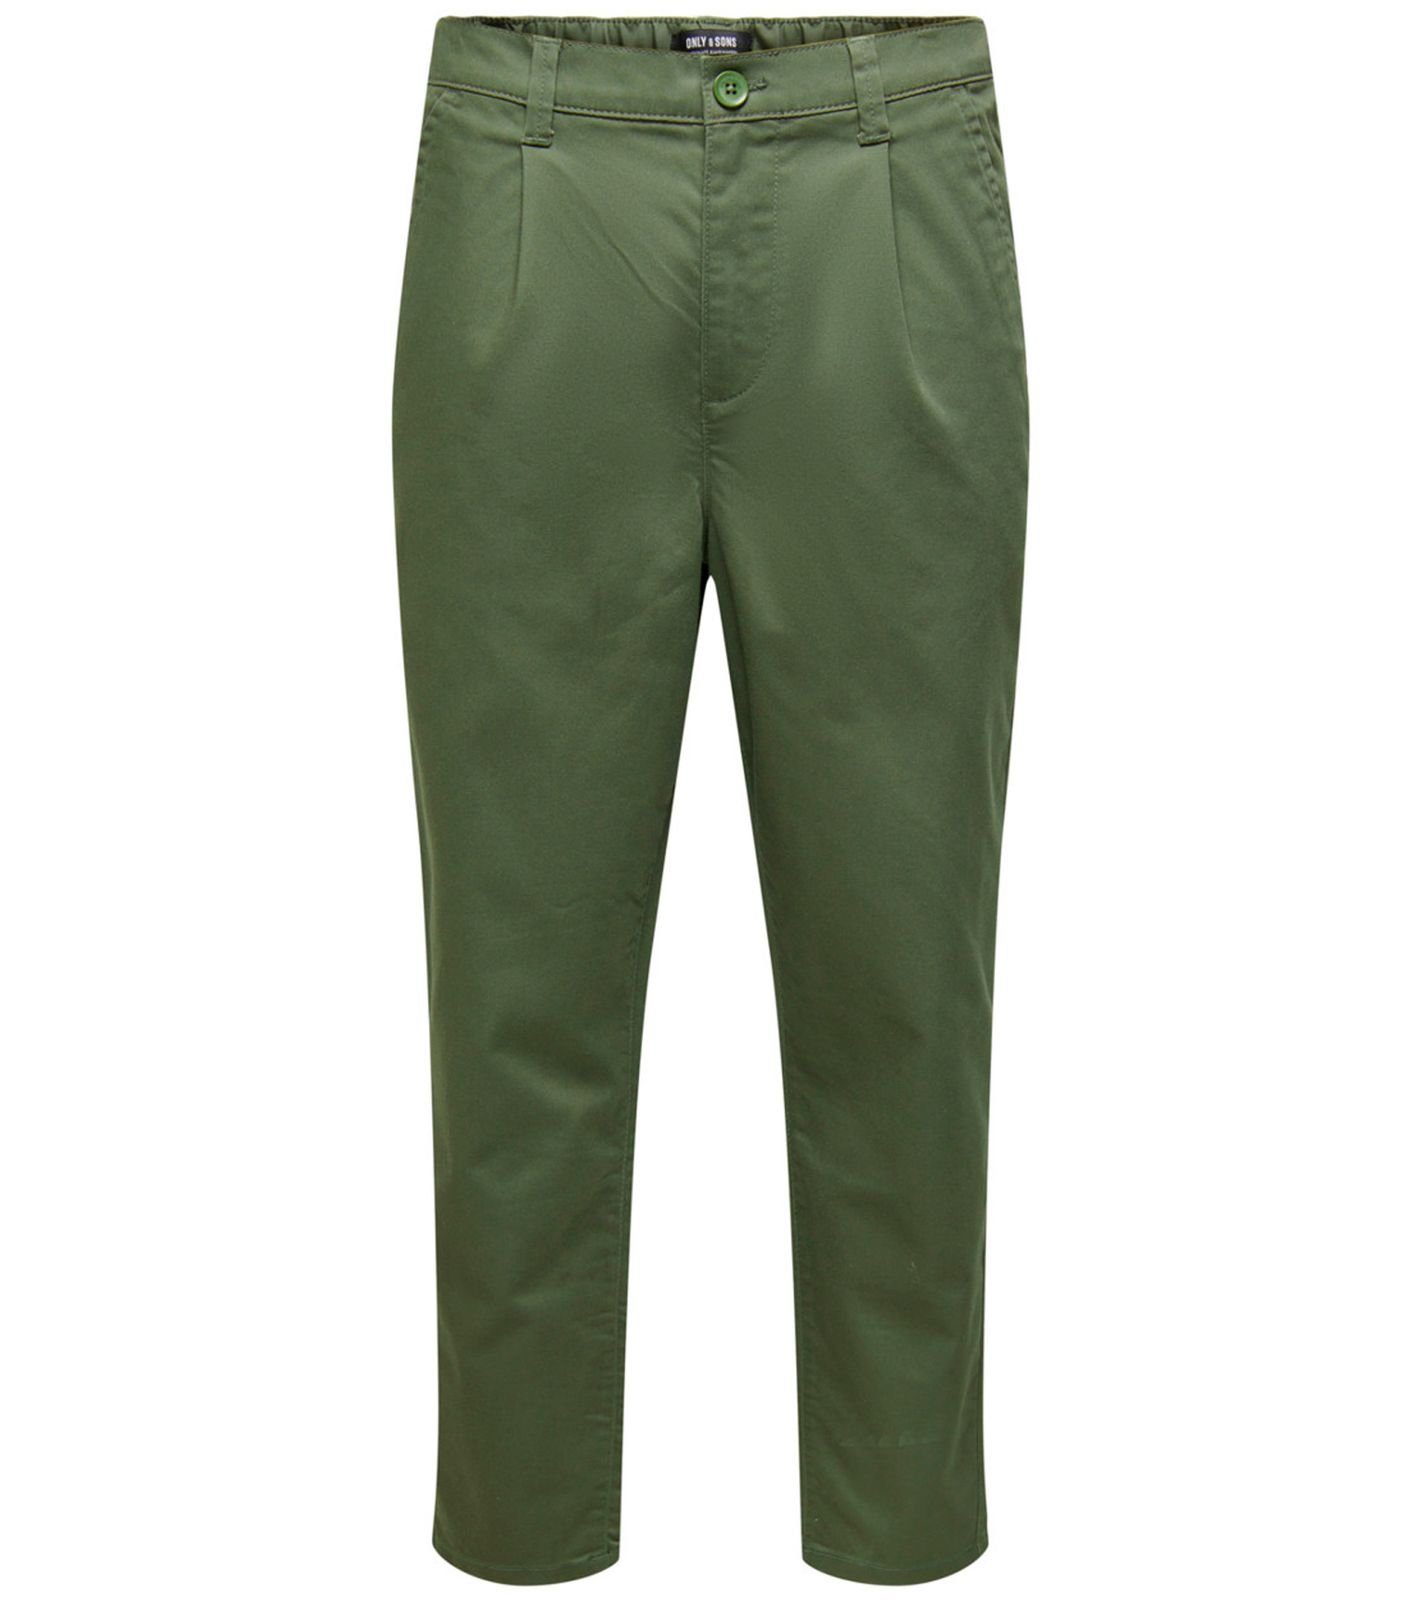 ONLY & SONS Chinohose ONLY & SONS Dew Tapered Herren Chino-Hose Freizeit-Hose 22021486 Stoff-Hose Oliv Grün